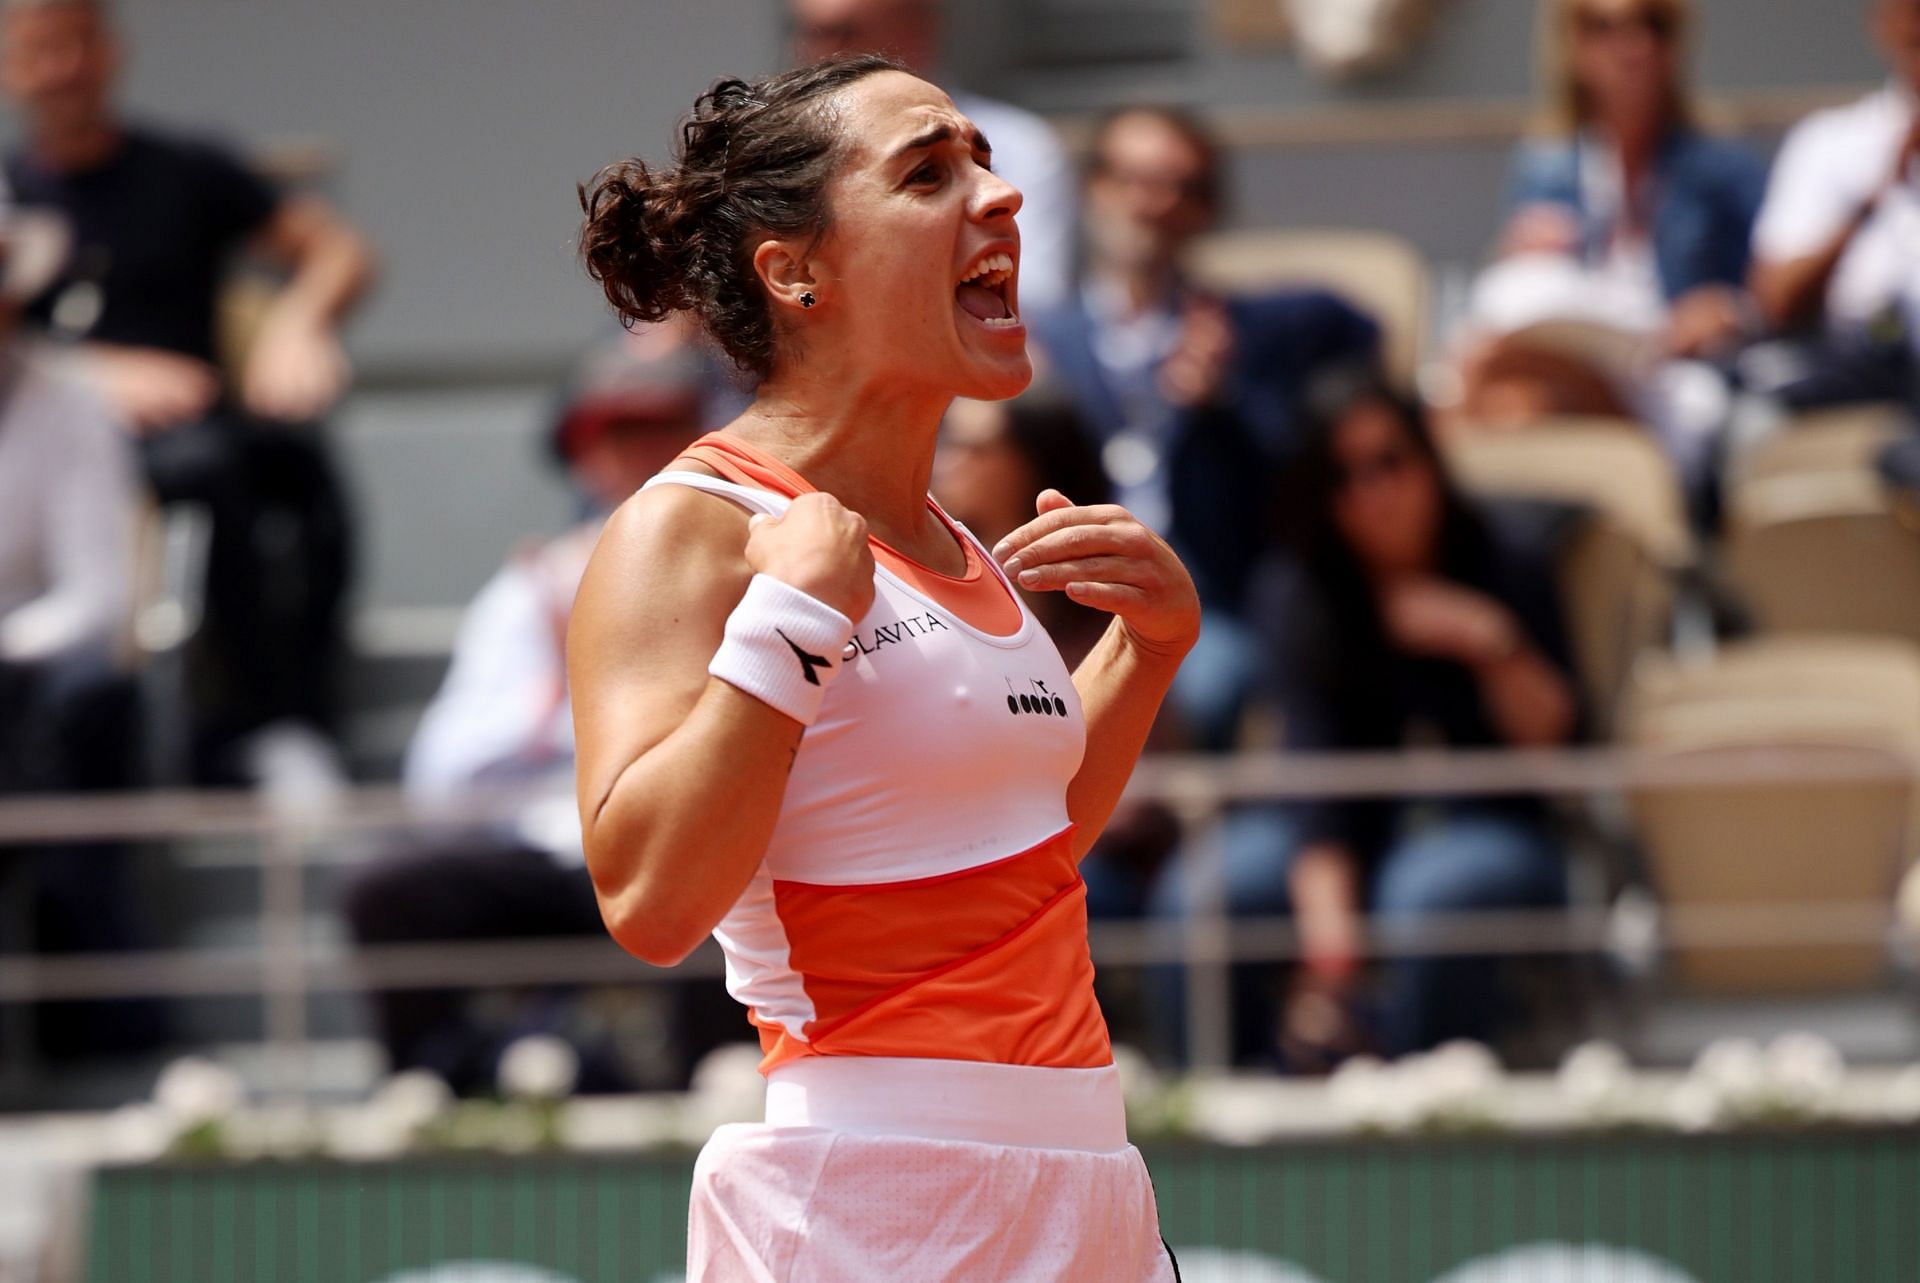 Martina Trevisan makes Grand Slam semifinal debut in French Open after beating 2021 US Open finalist Leylah Fernandez.